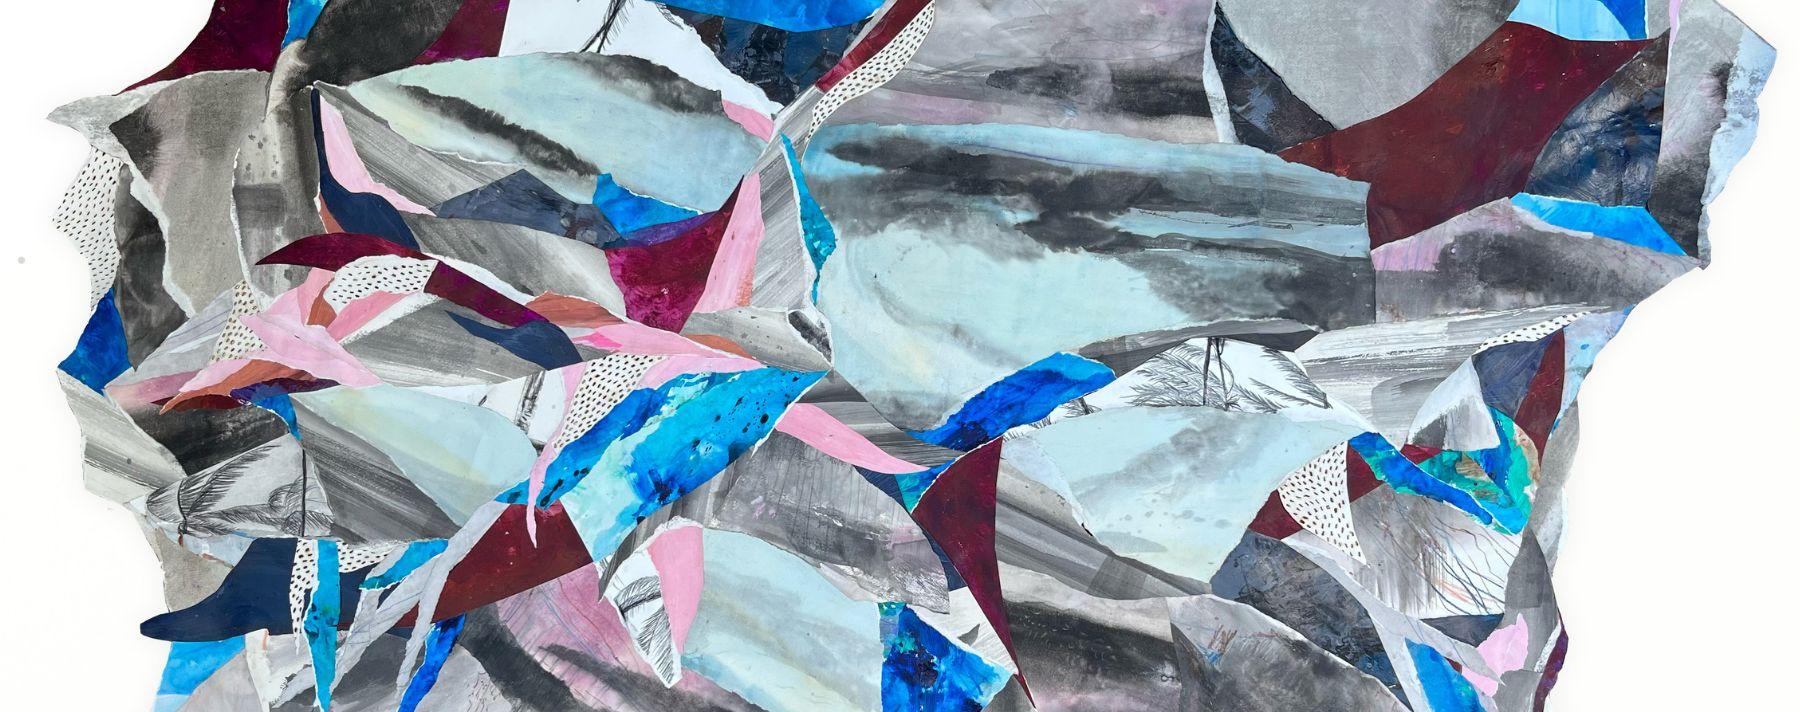 La Vaughn Belle collage from Storm series, Detail image showing collaged elements